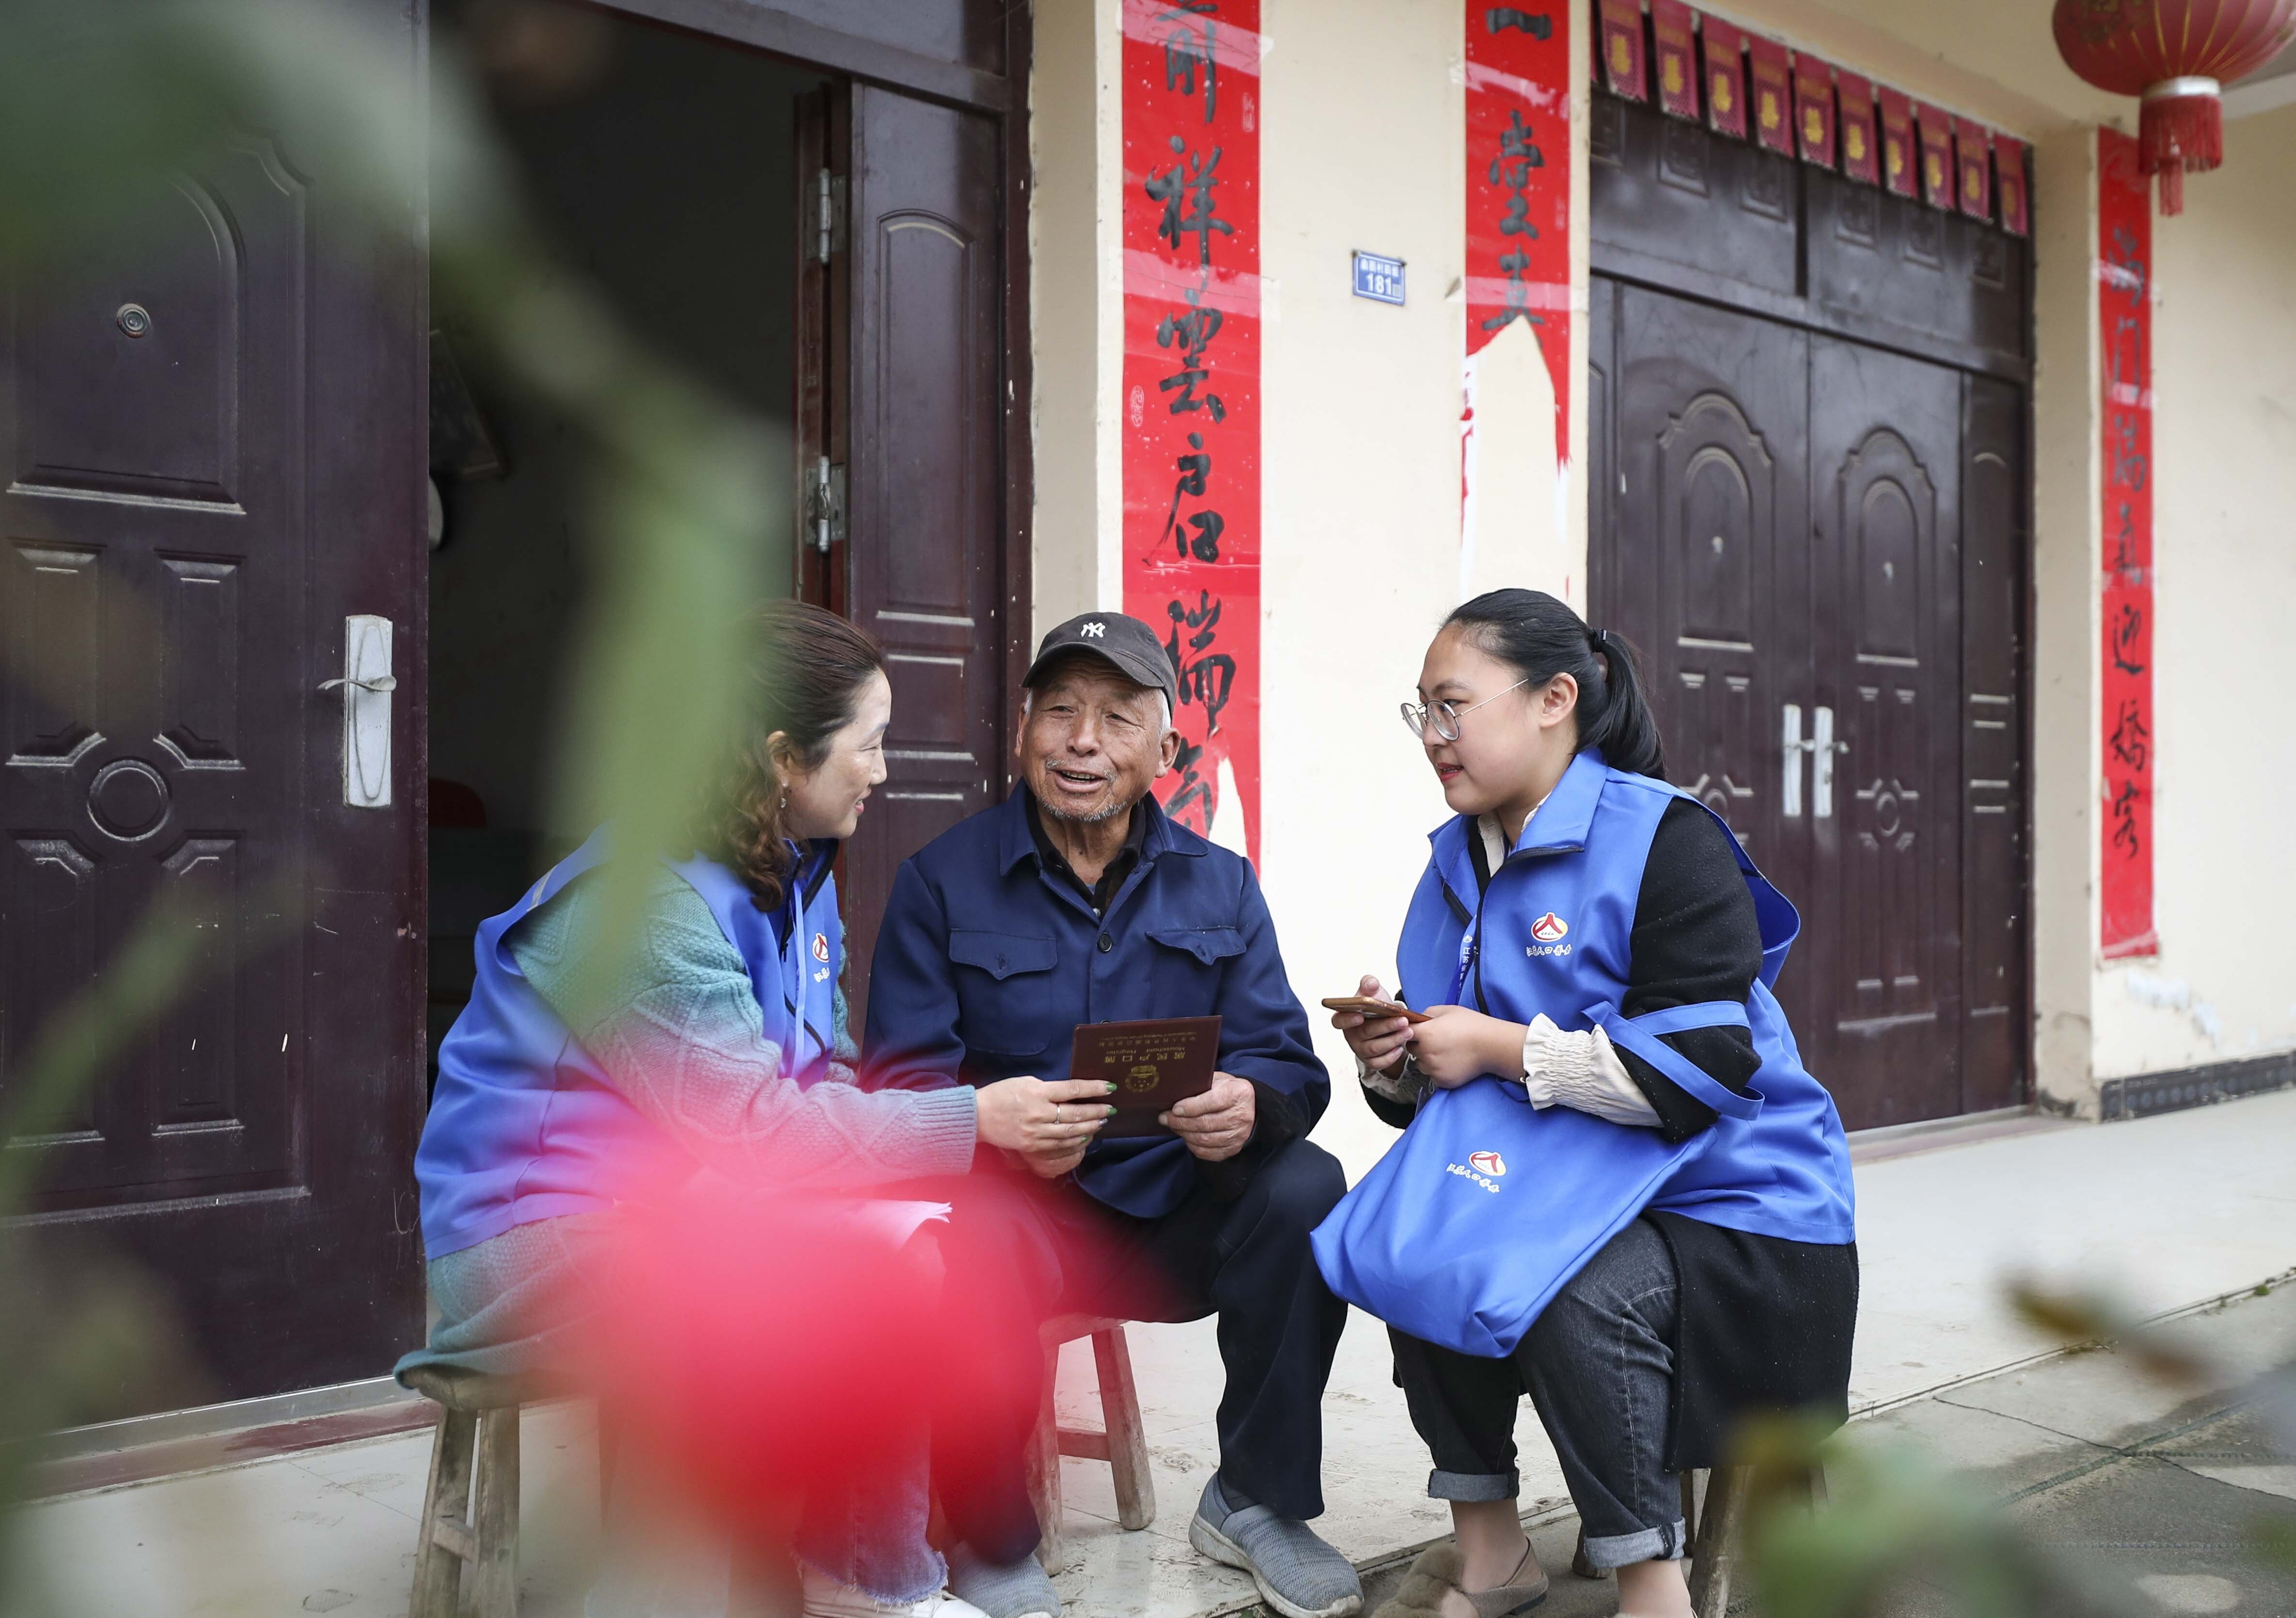 China conducted its seventh national population census in November and December 2020, where a huge range of personal and household information, including the age, education, occupation, marital and migration status of people living in the world’s most populous nation was gathered. Photo: Getty Images